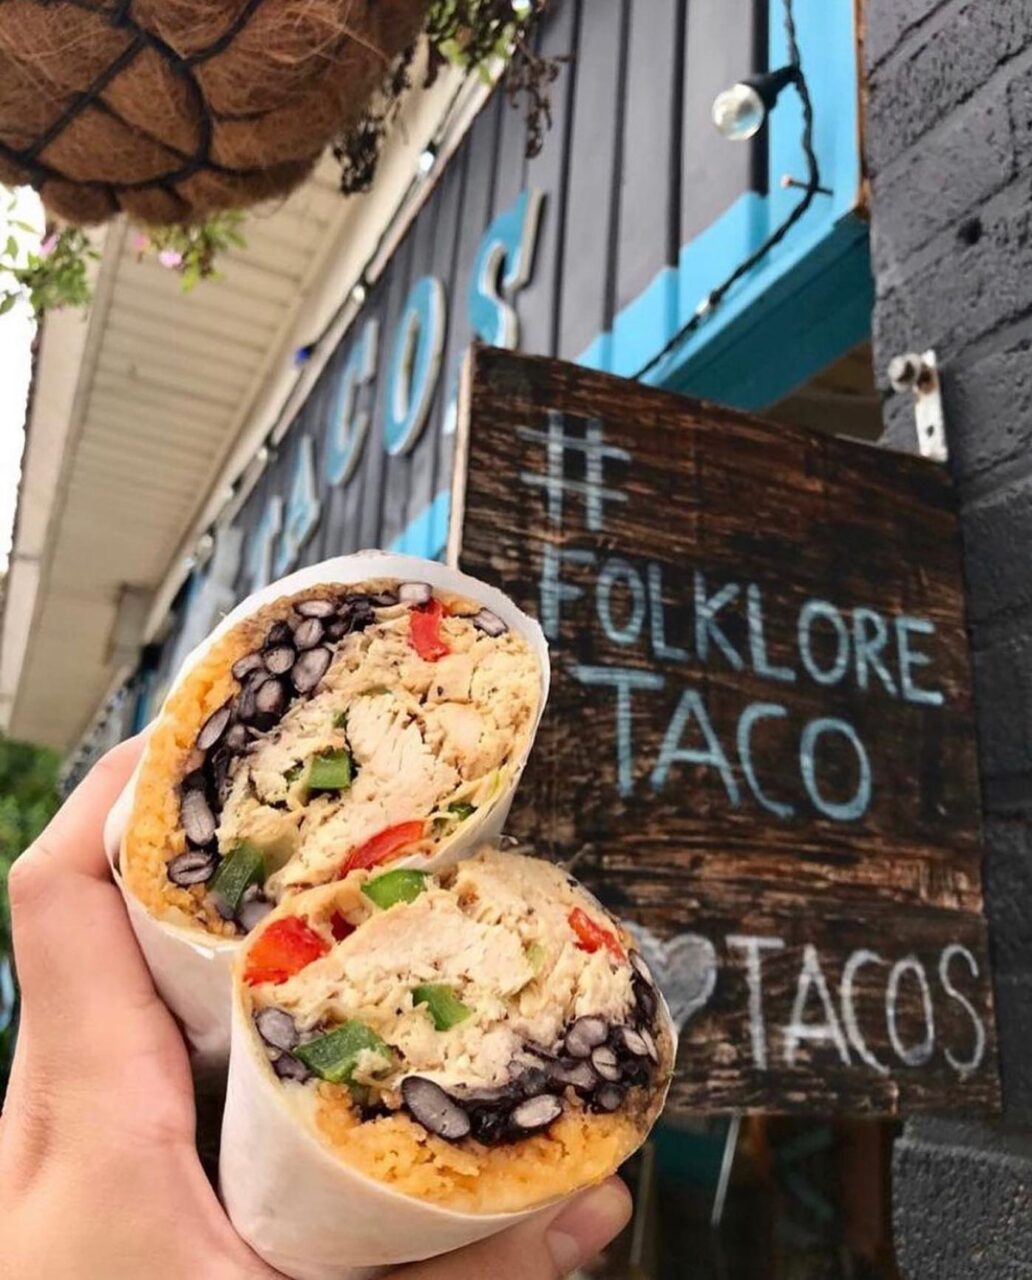 Folklore Artisanal Taco, Folklore Artisanal Taco Brings Authentic Tacos to the Cranford Area!